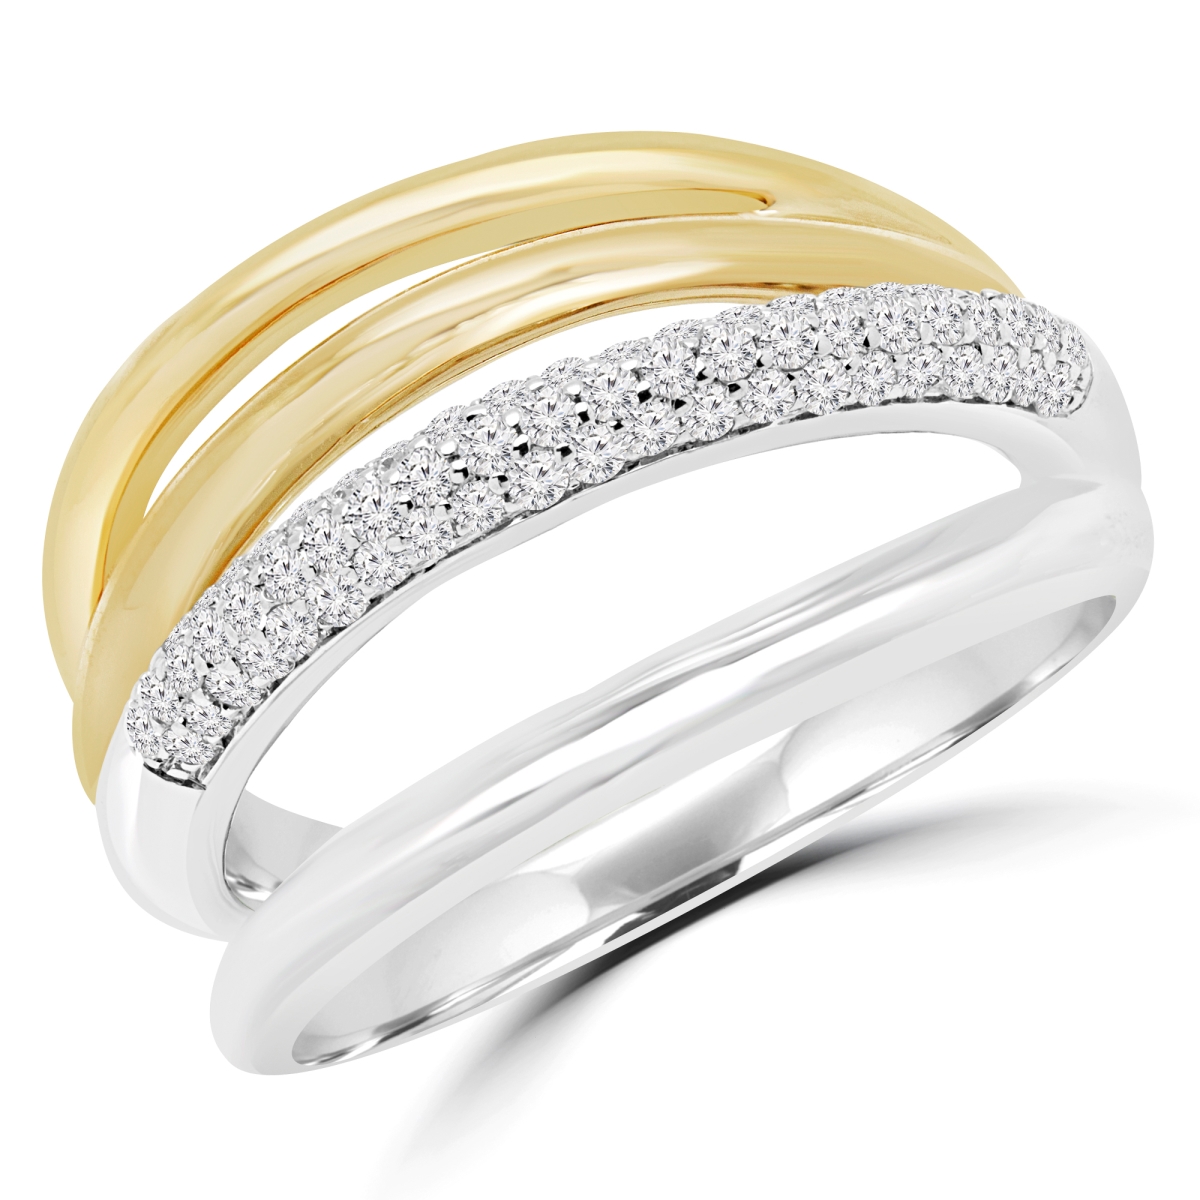 Picture of Majesty Diamonds MDR170050-8.25 0.37 CTW Round Diamond Cocktail Semi-Eternity Ring in 14K Two-Tone Gold - 8.25